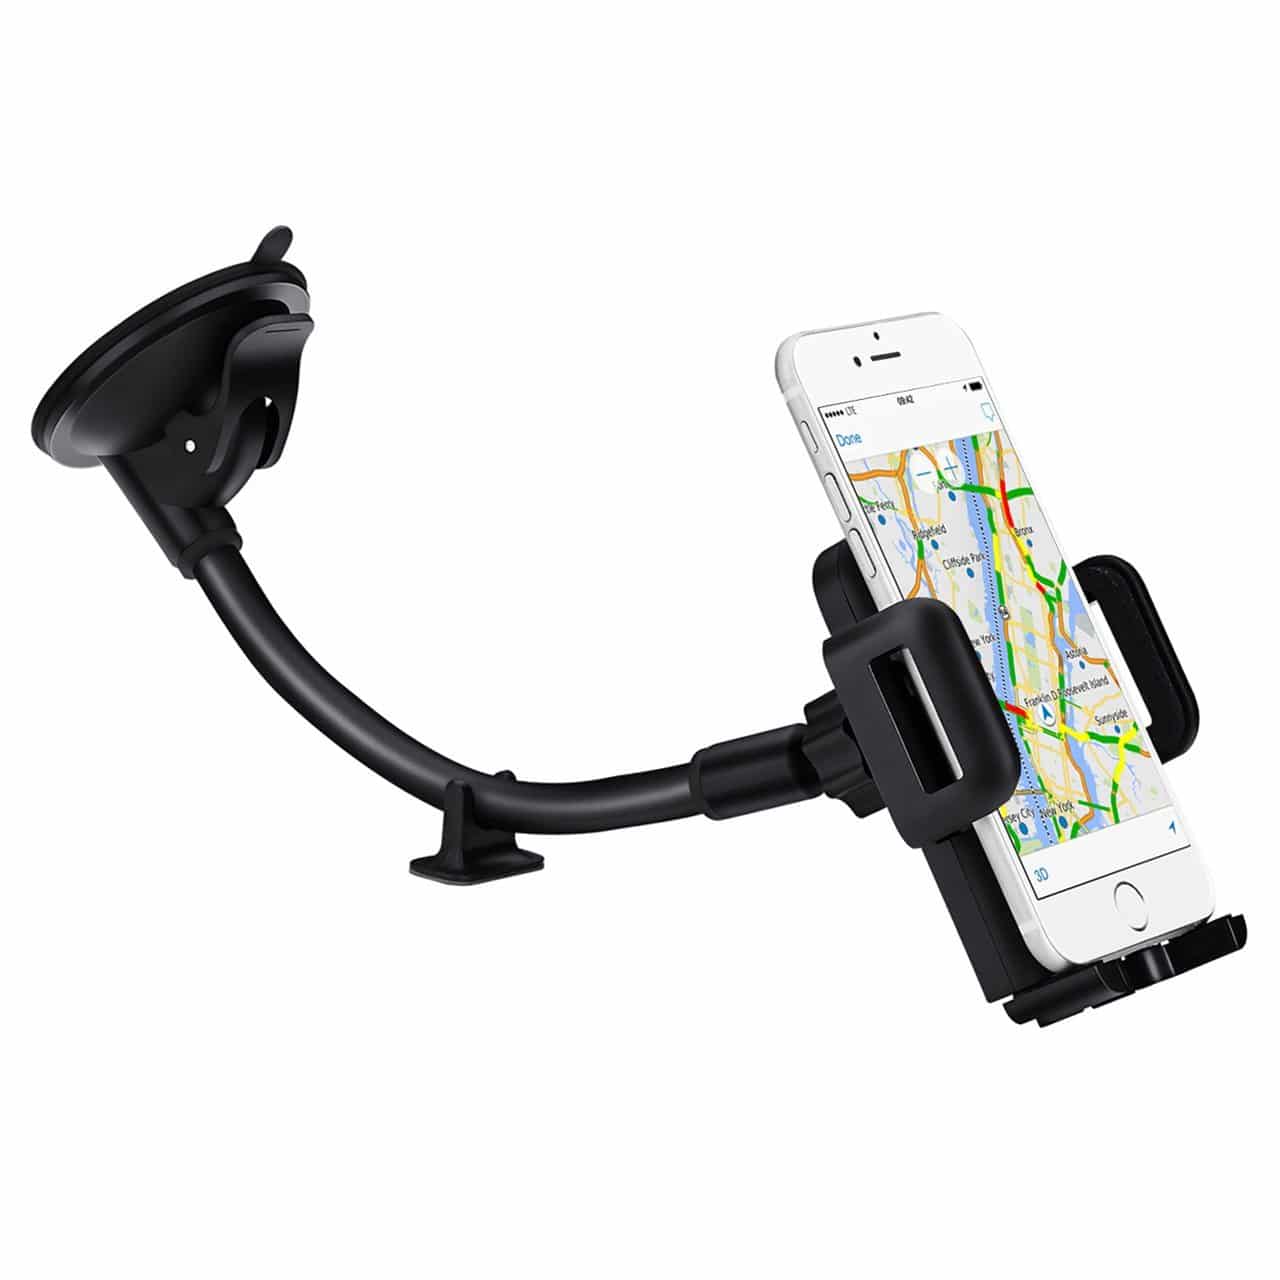 Review of Mpow Grip Pro 2 Dashboard Car Phone Holder